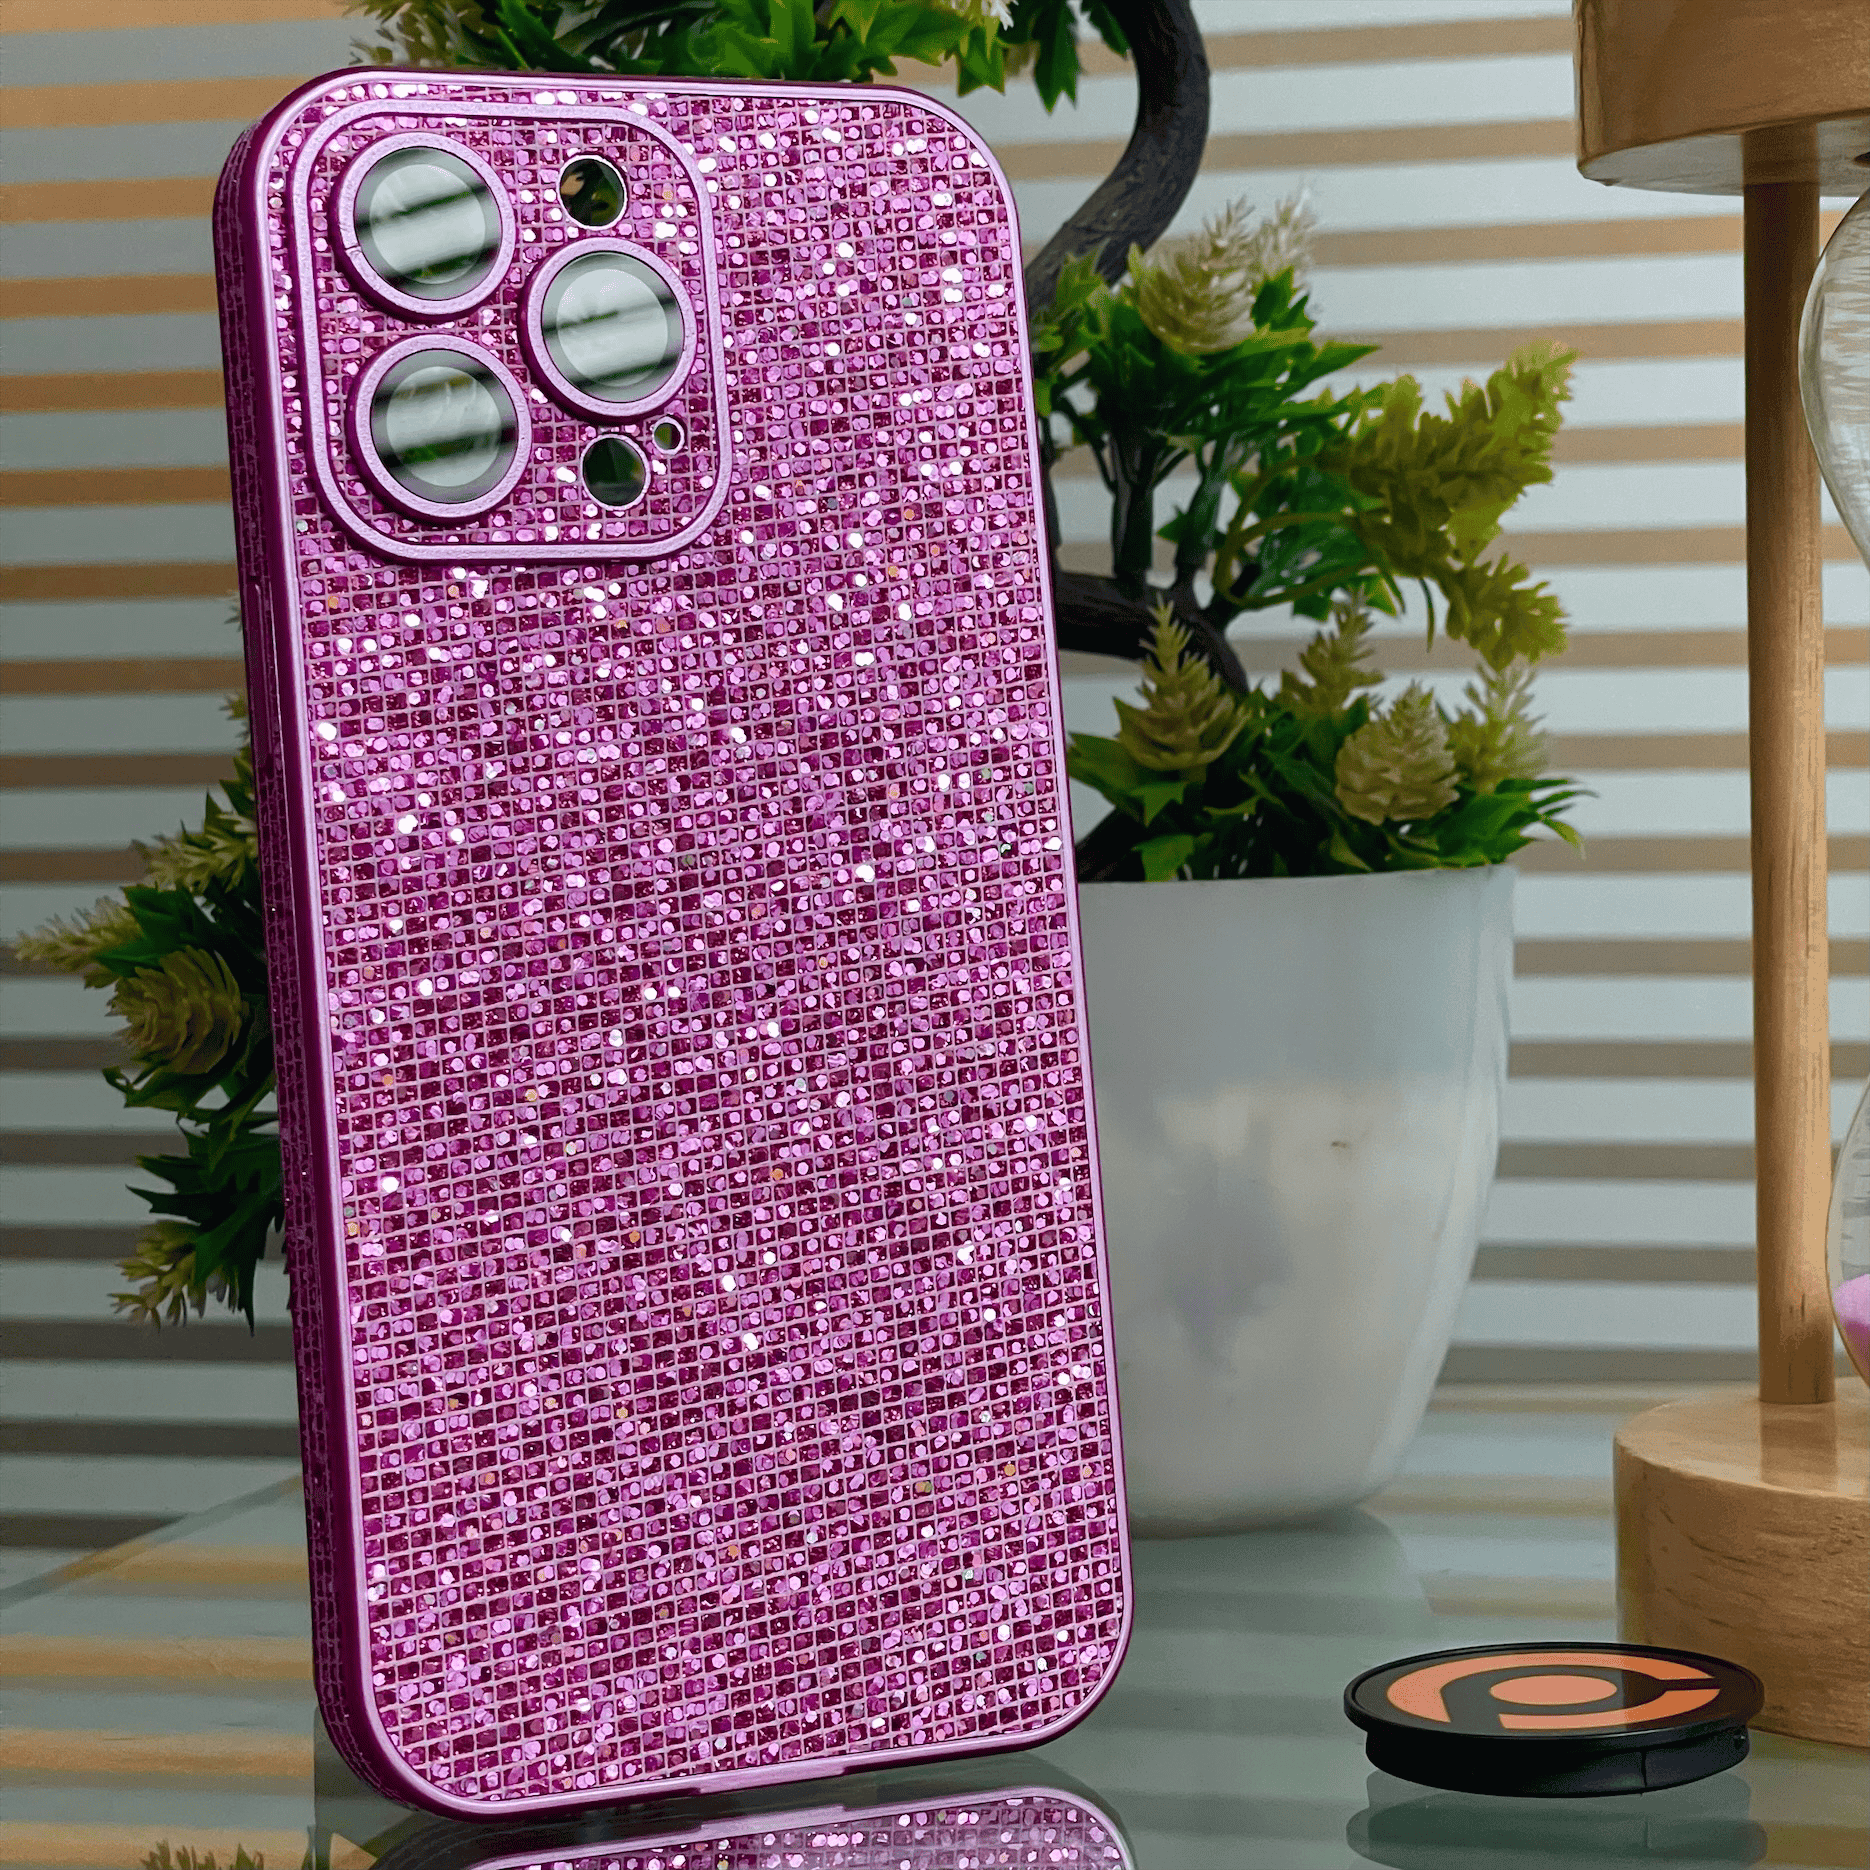 iPhone 12 Pro Max Diamond Glitter Case with Built-in Camera Lens Glass